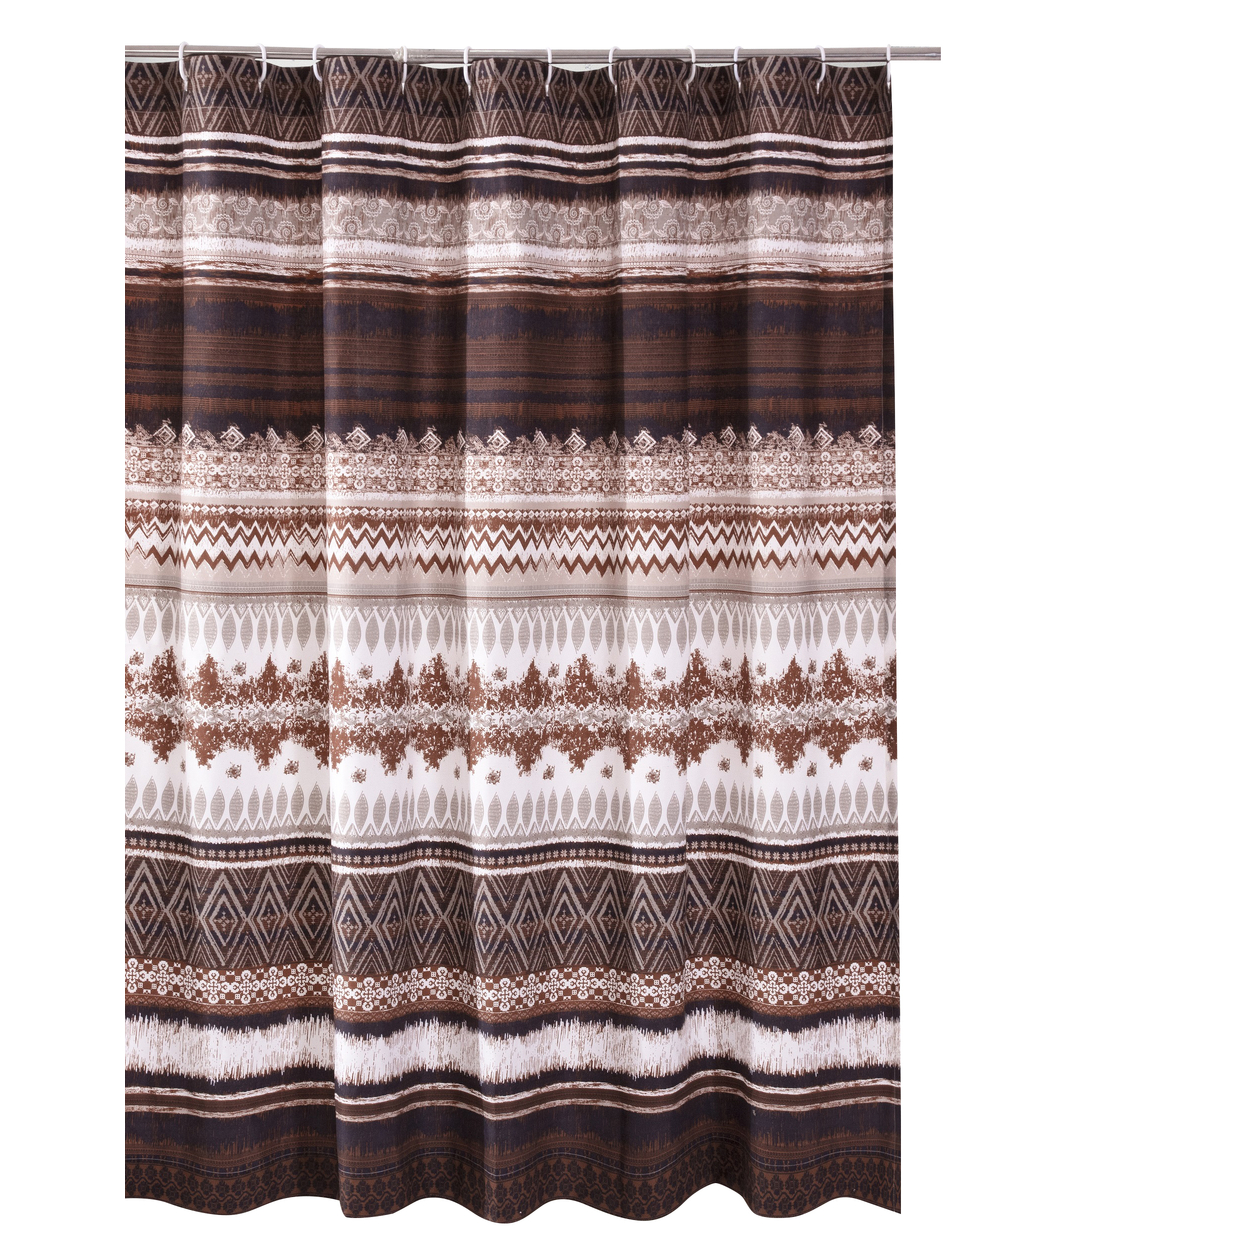 Roca 72 Inch Shower Curtain, Coffee Brown Striped Printing, Button Holes